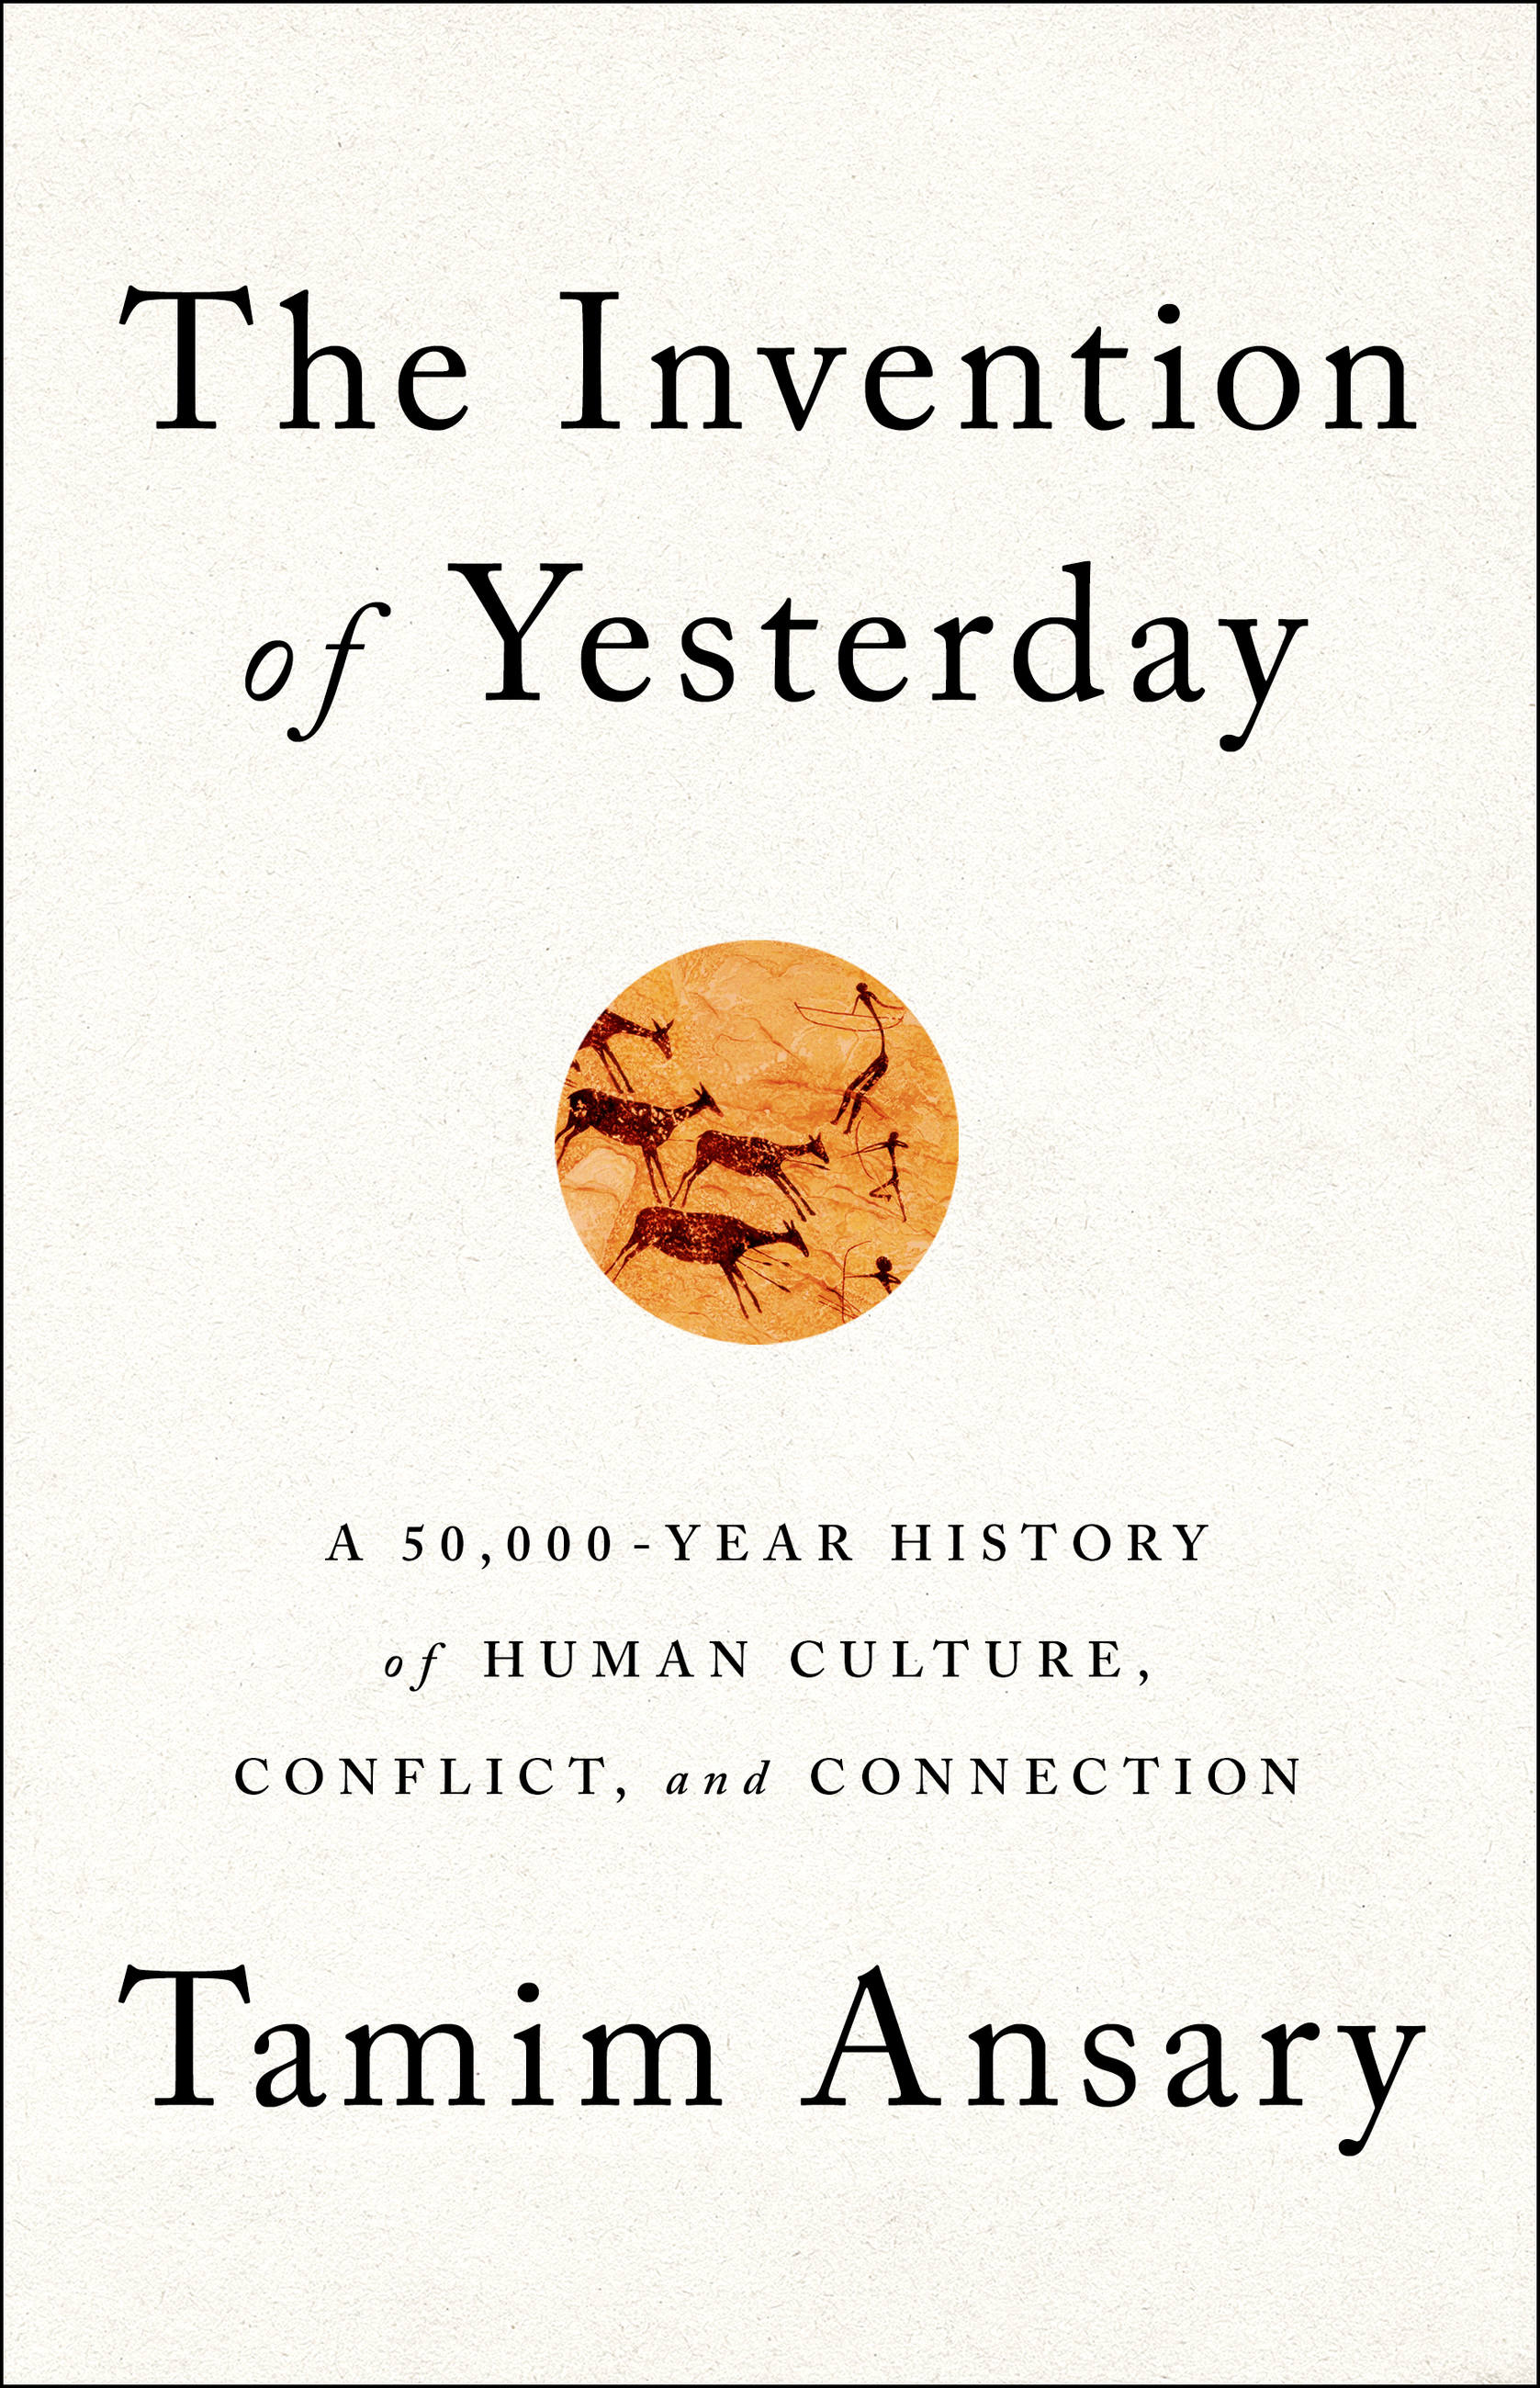 The Invention of Yesterday by Tamim Ansary